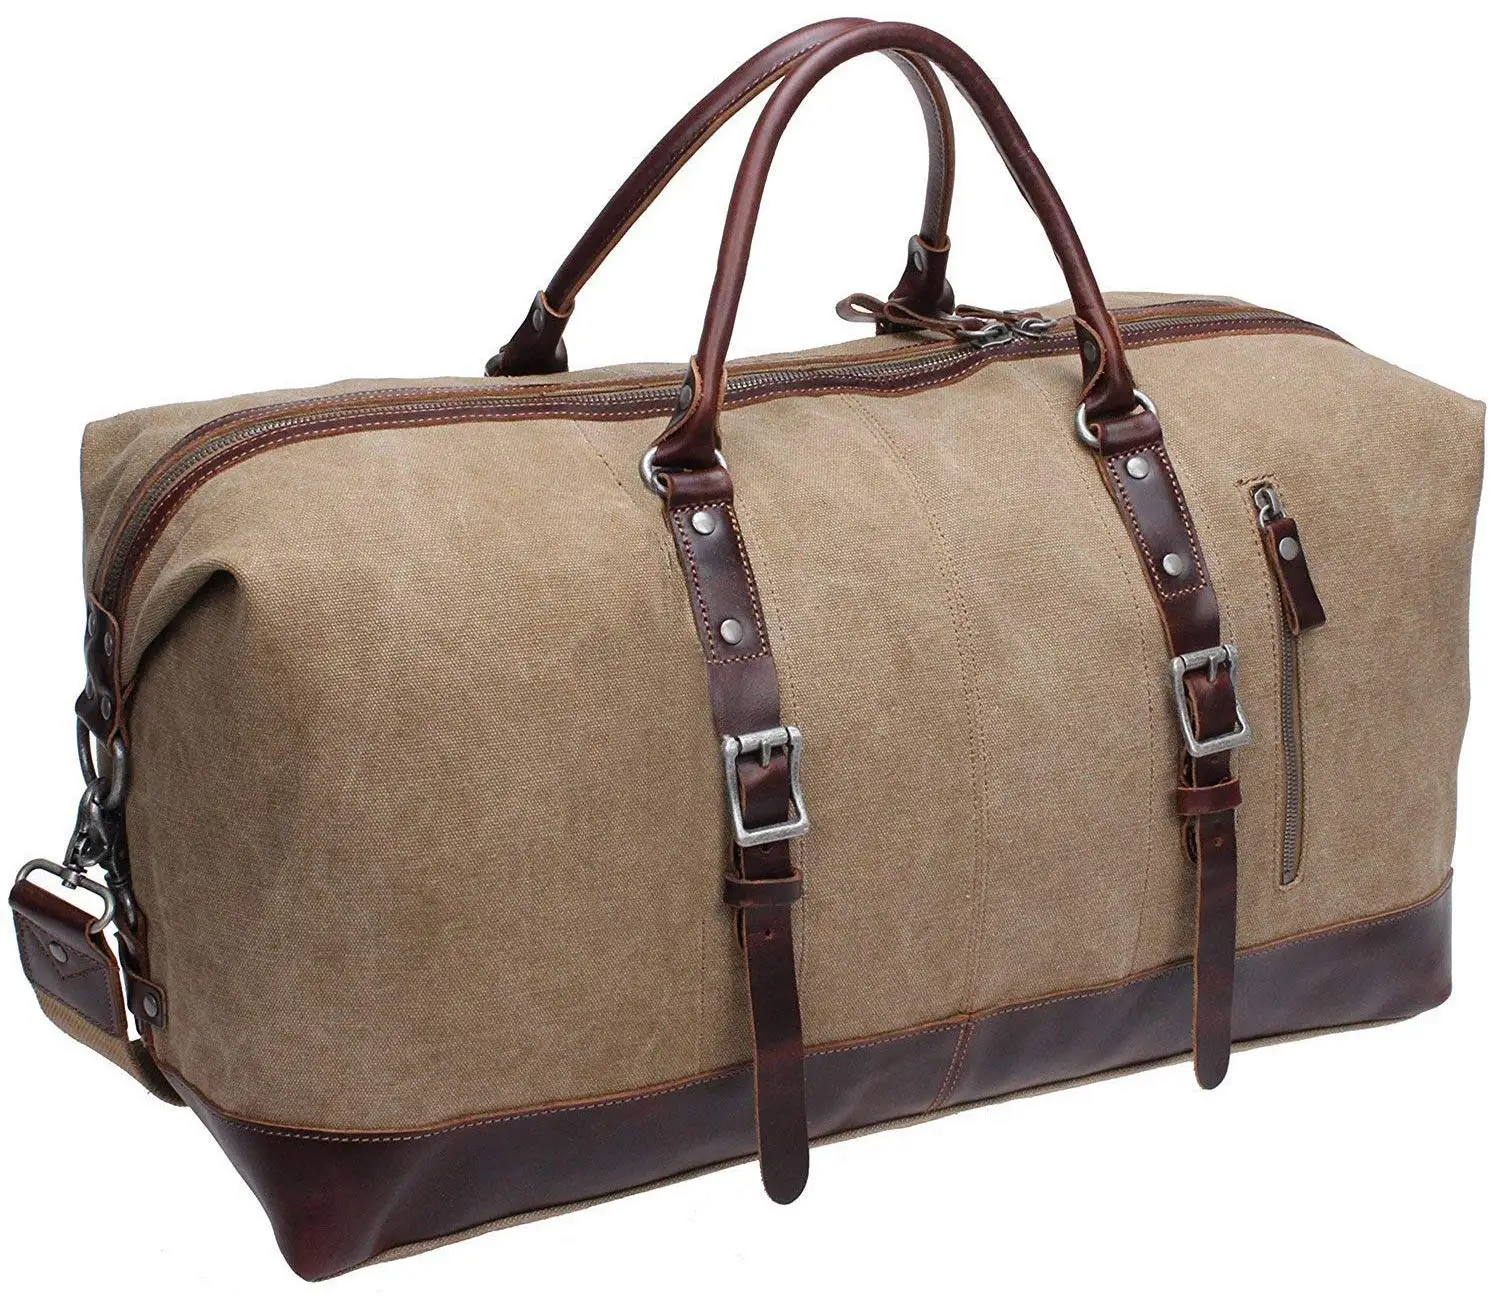 Canvas Leather Duffle Bag Extra Large Travel Tote Weekender Carry On Overnight Bag - Buy Canvas ...